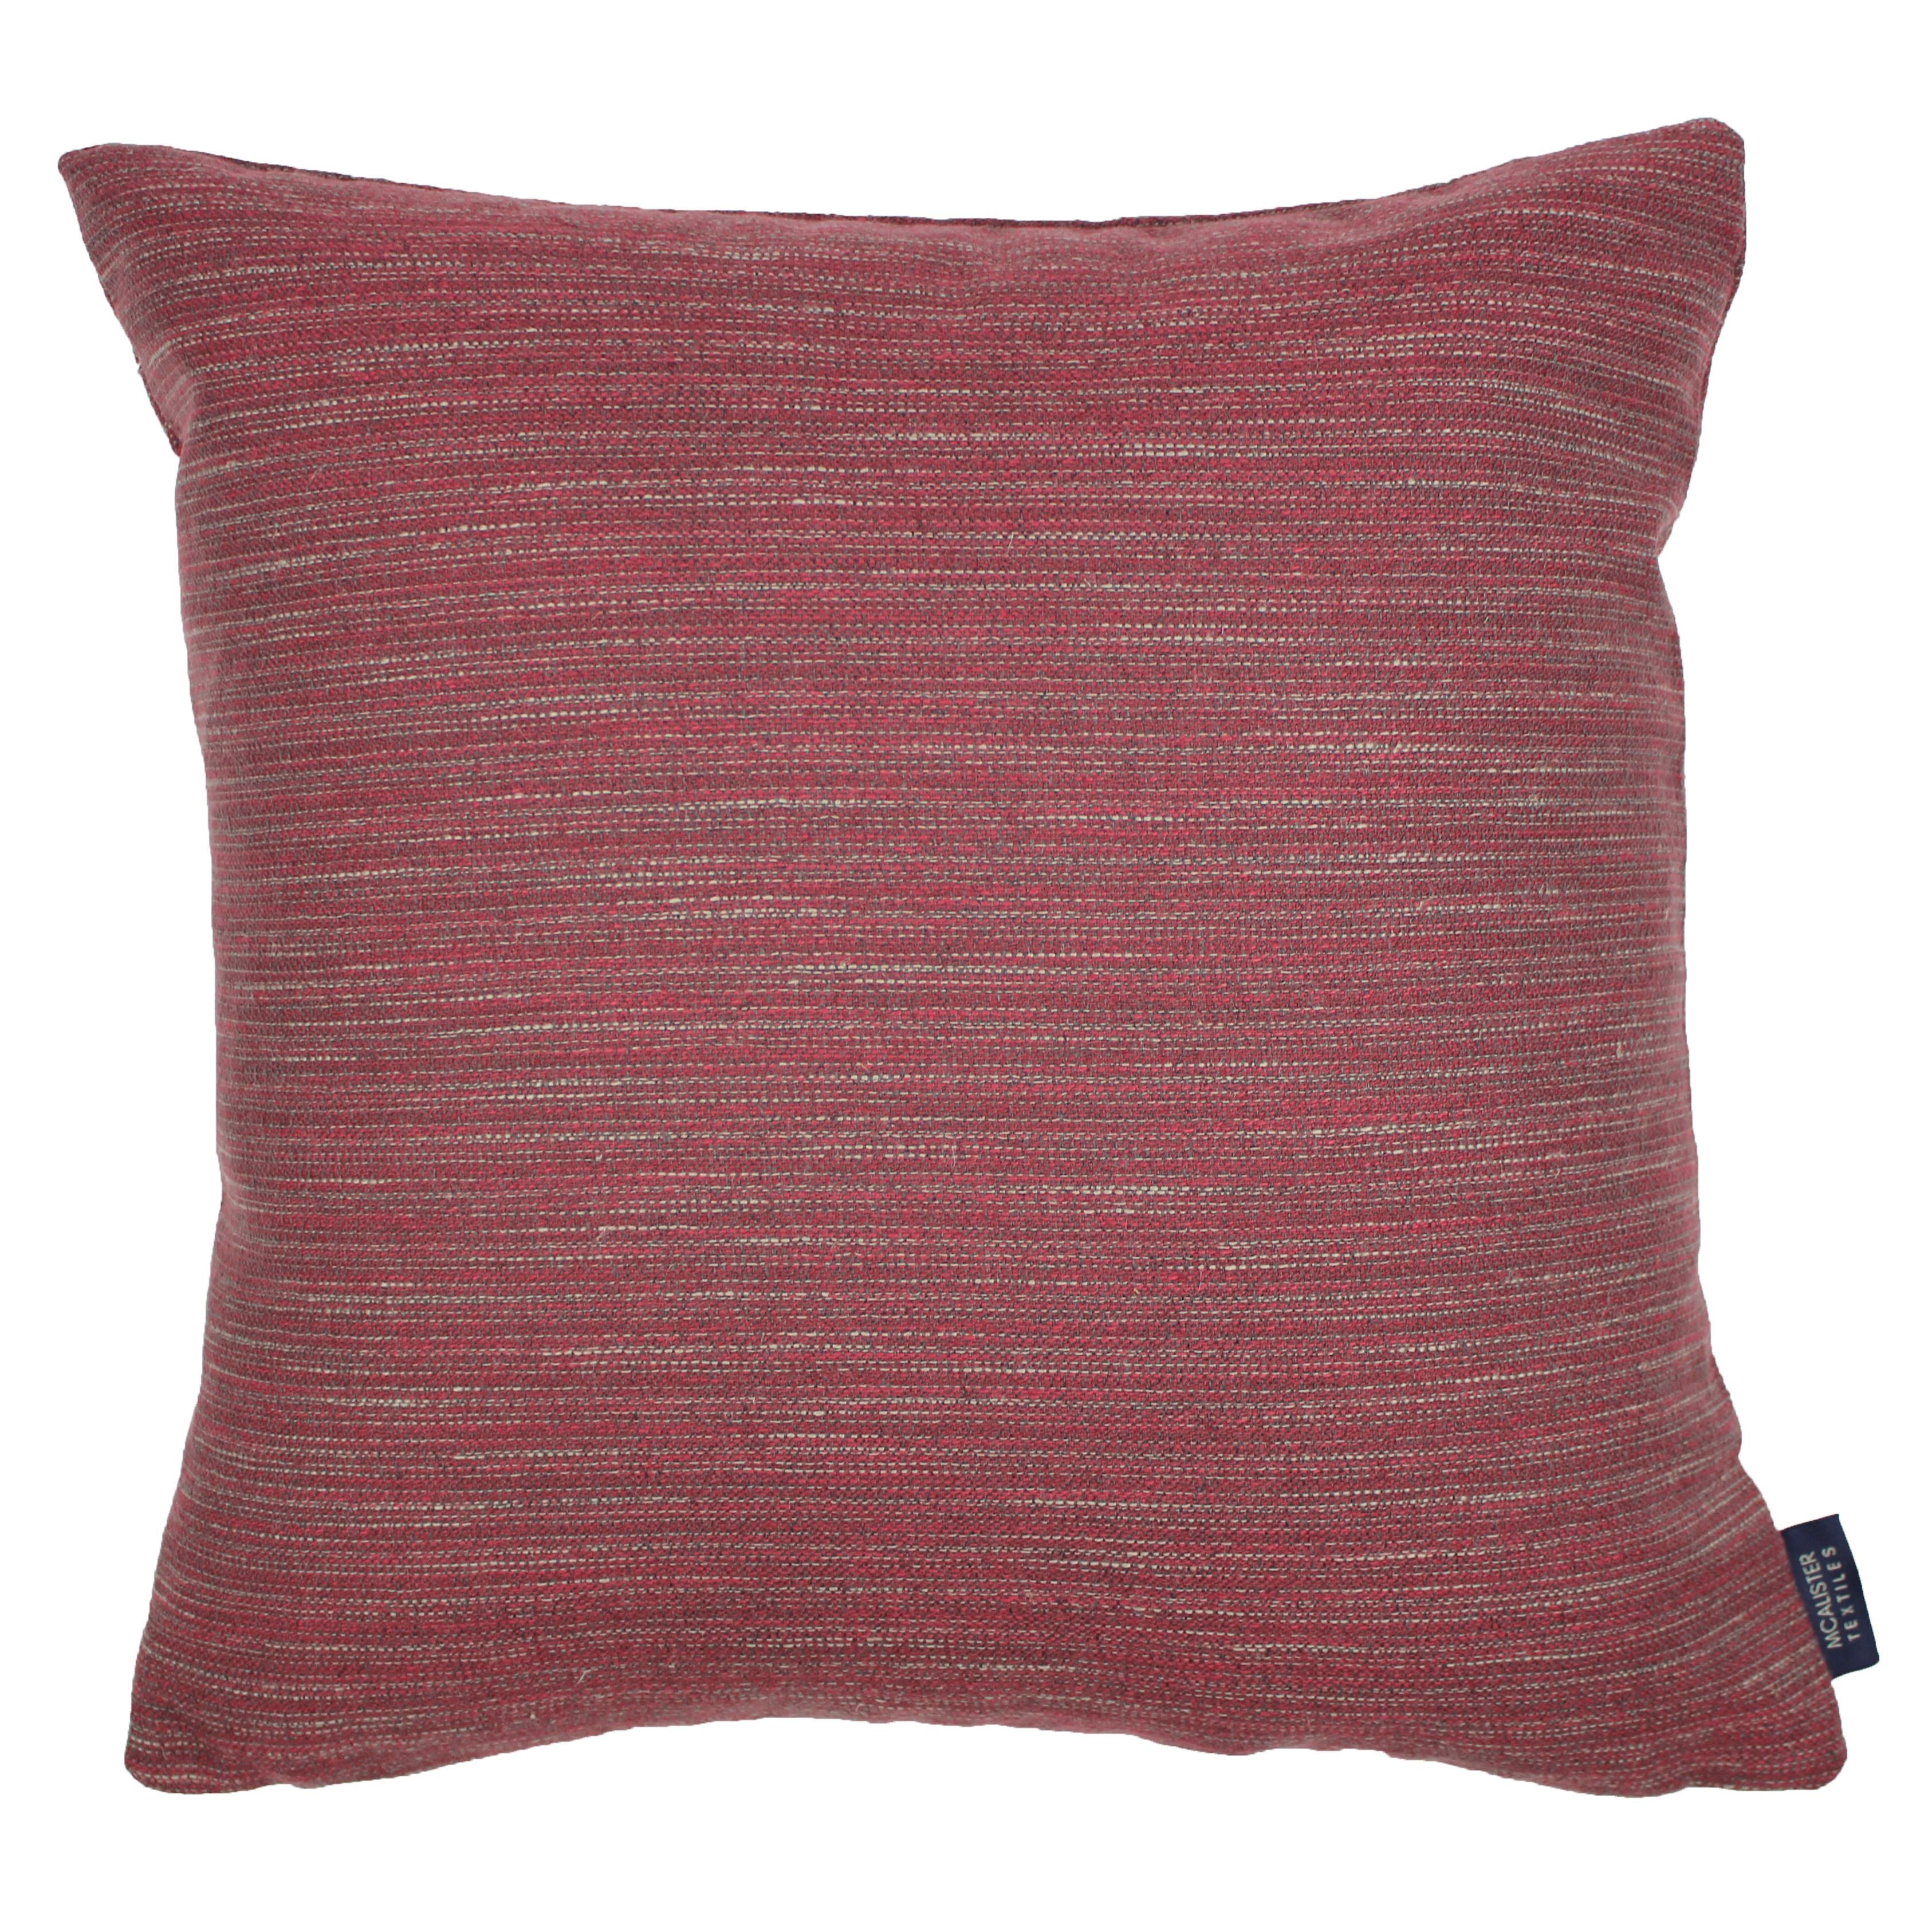 McAlister Textiles Hamleton Red Textured Plain Cushion Cushions and Covers Cover Only 49cm x 49cm 